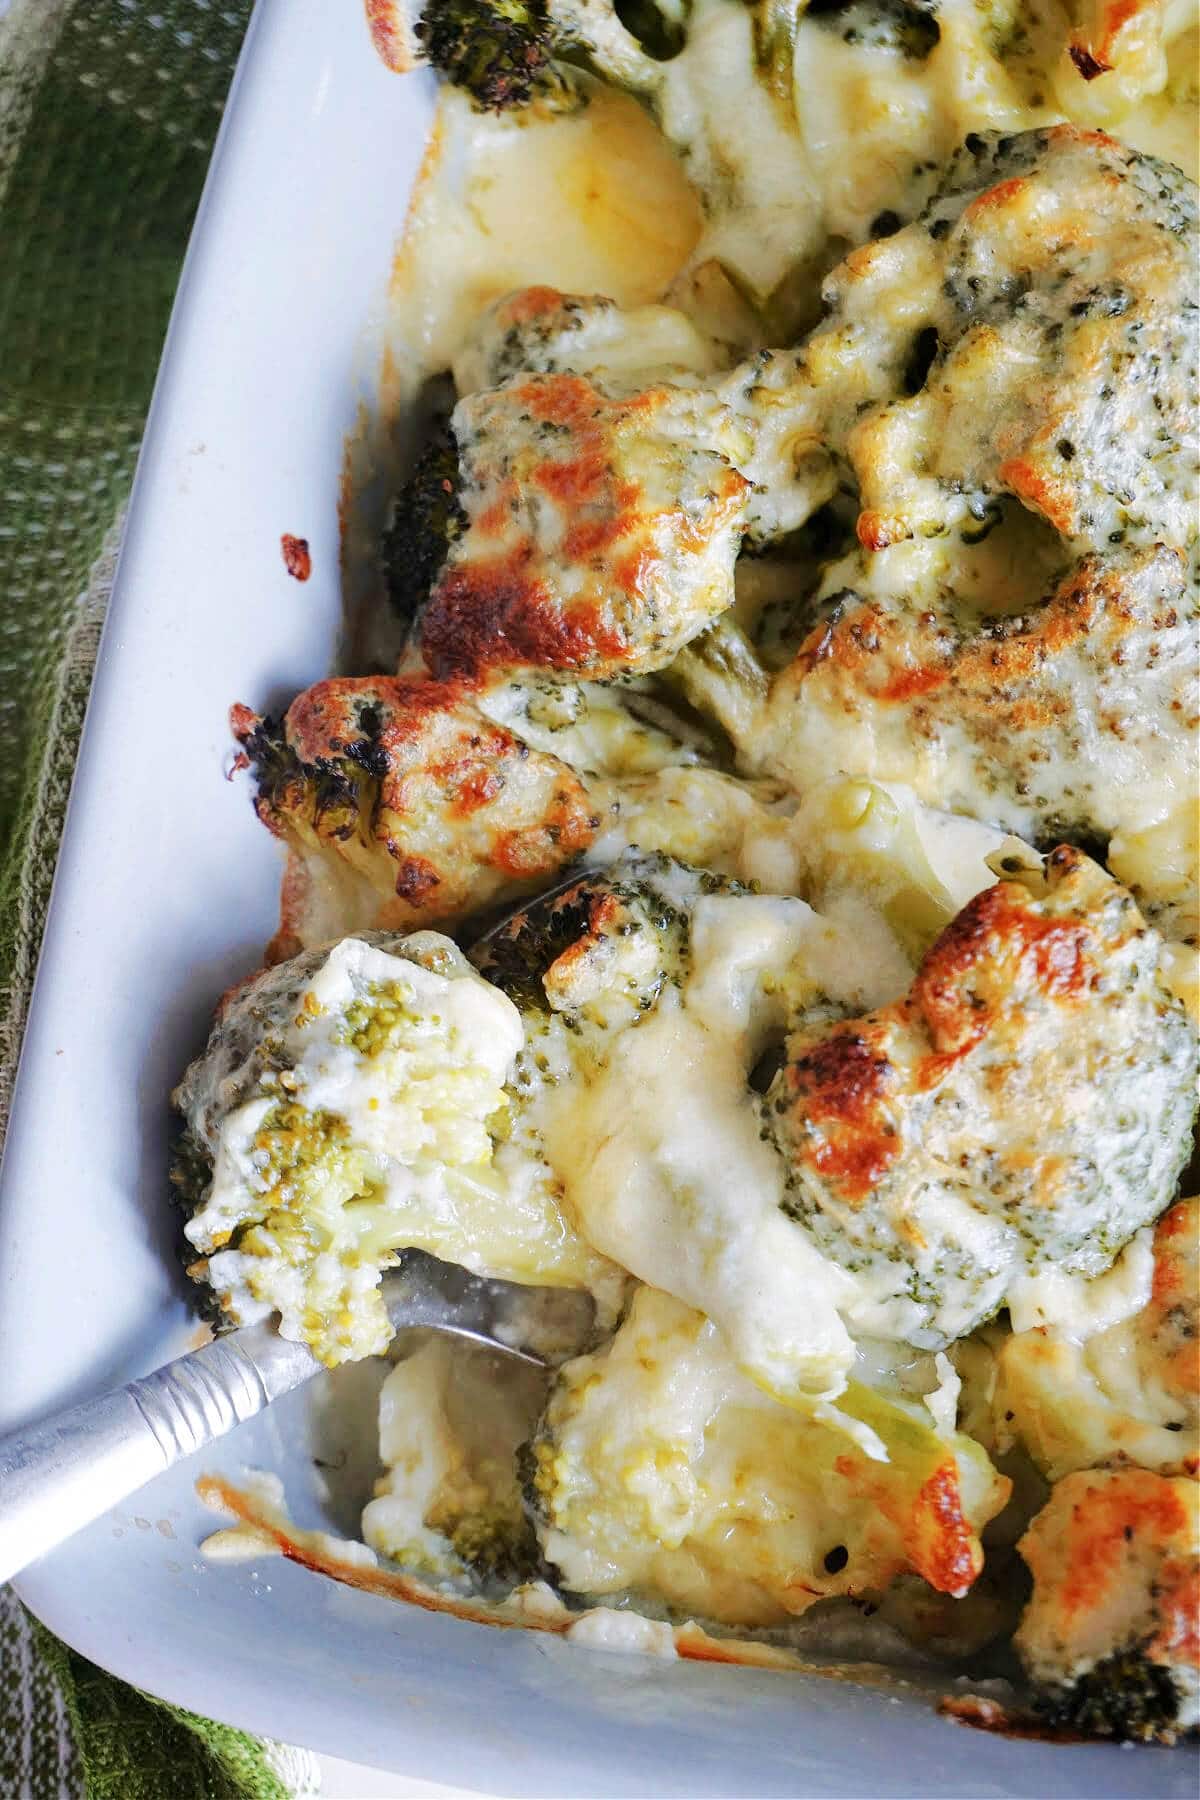 A dish with broccoli cheese